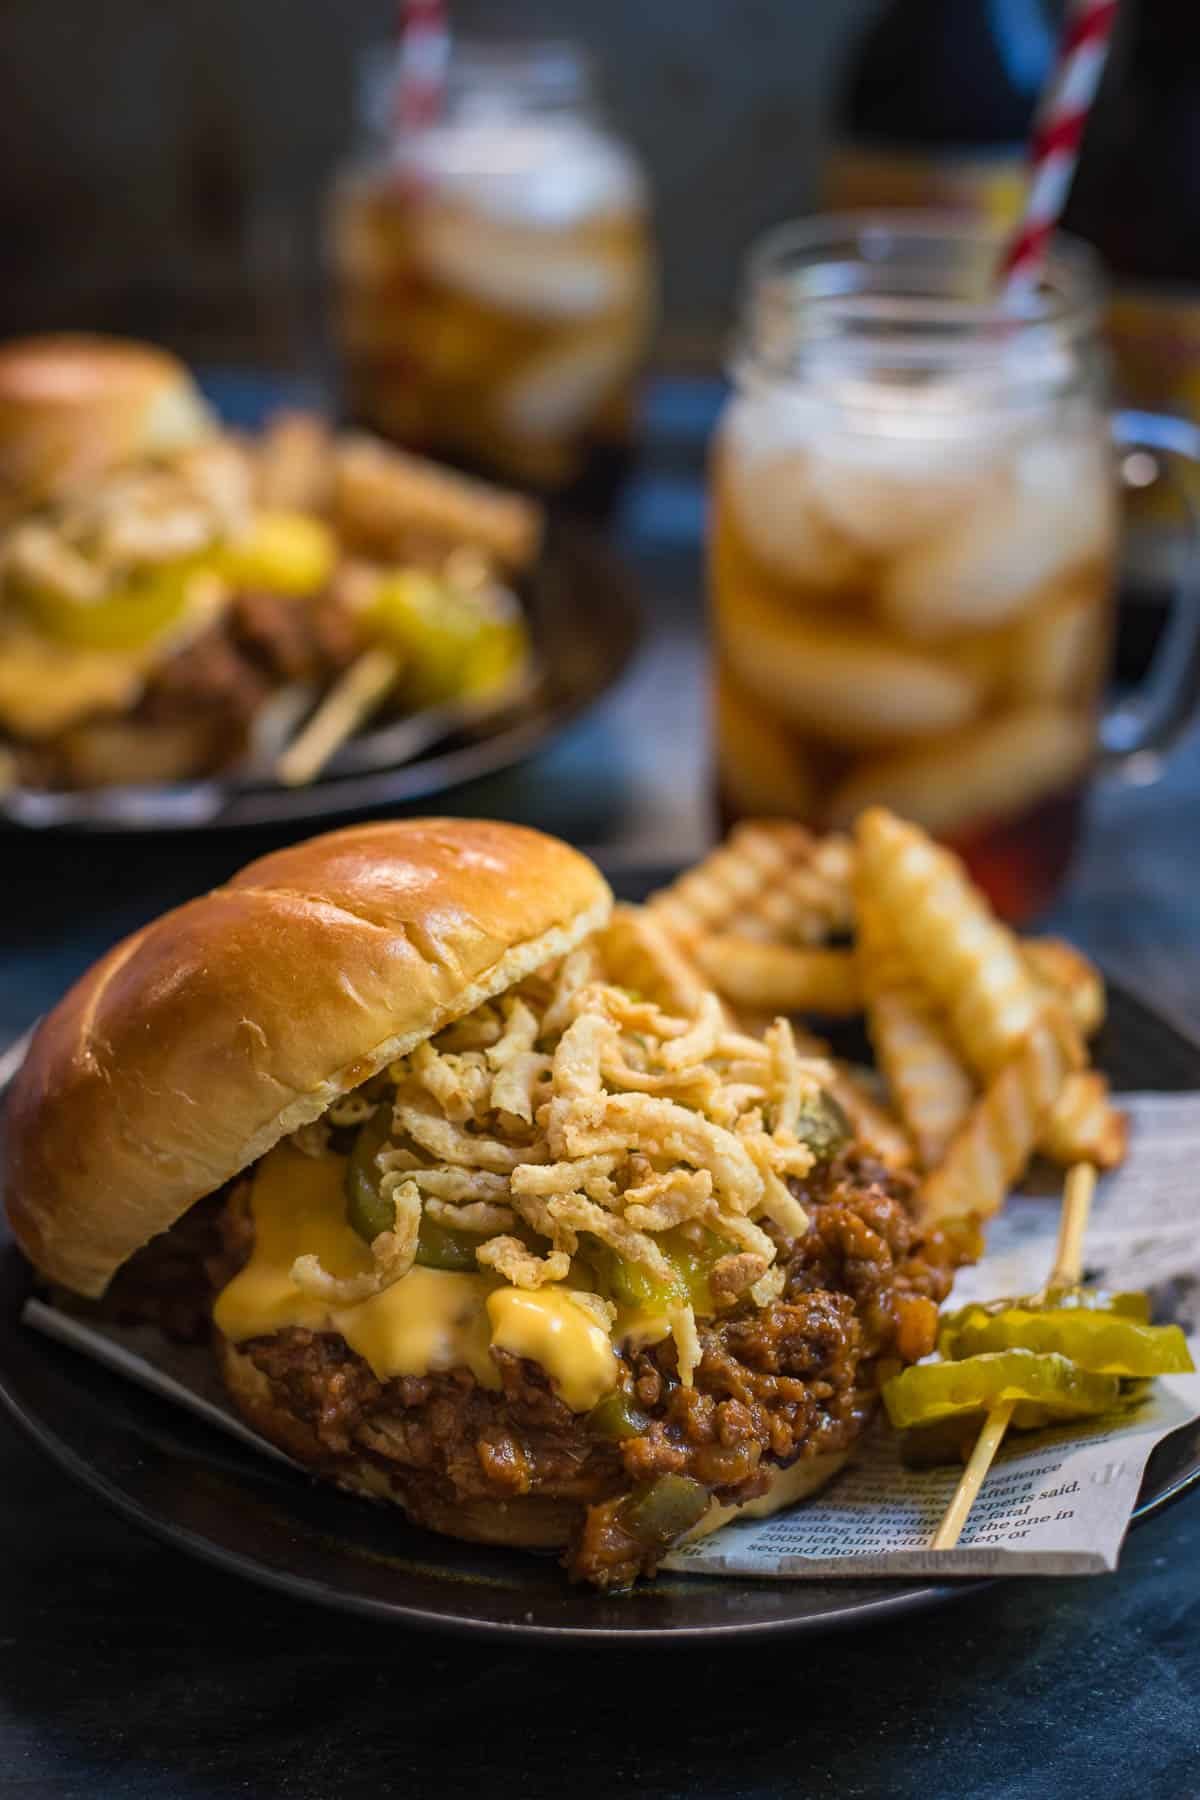 Slow Cooker Sloppy Joe Sandwich with melted cheese, french fried onions, and pickles.